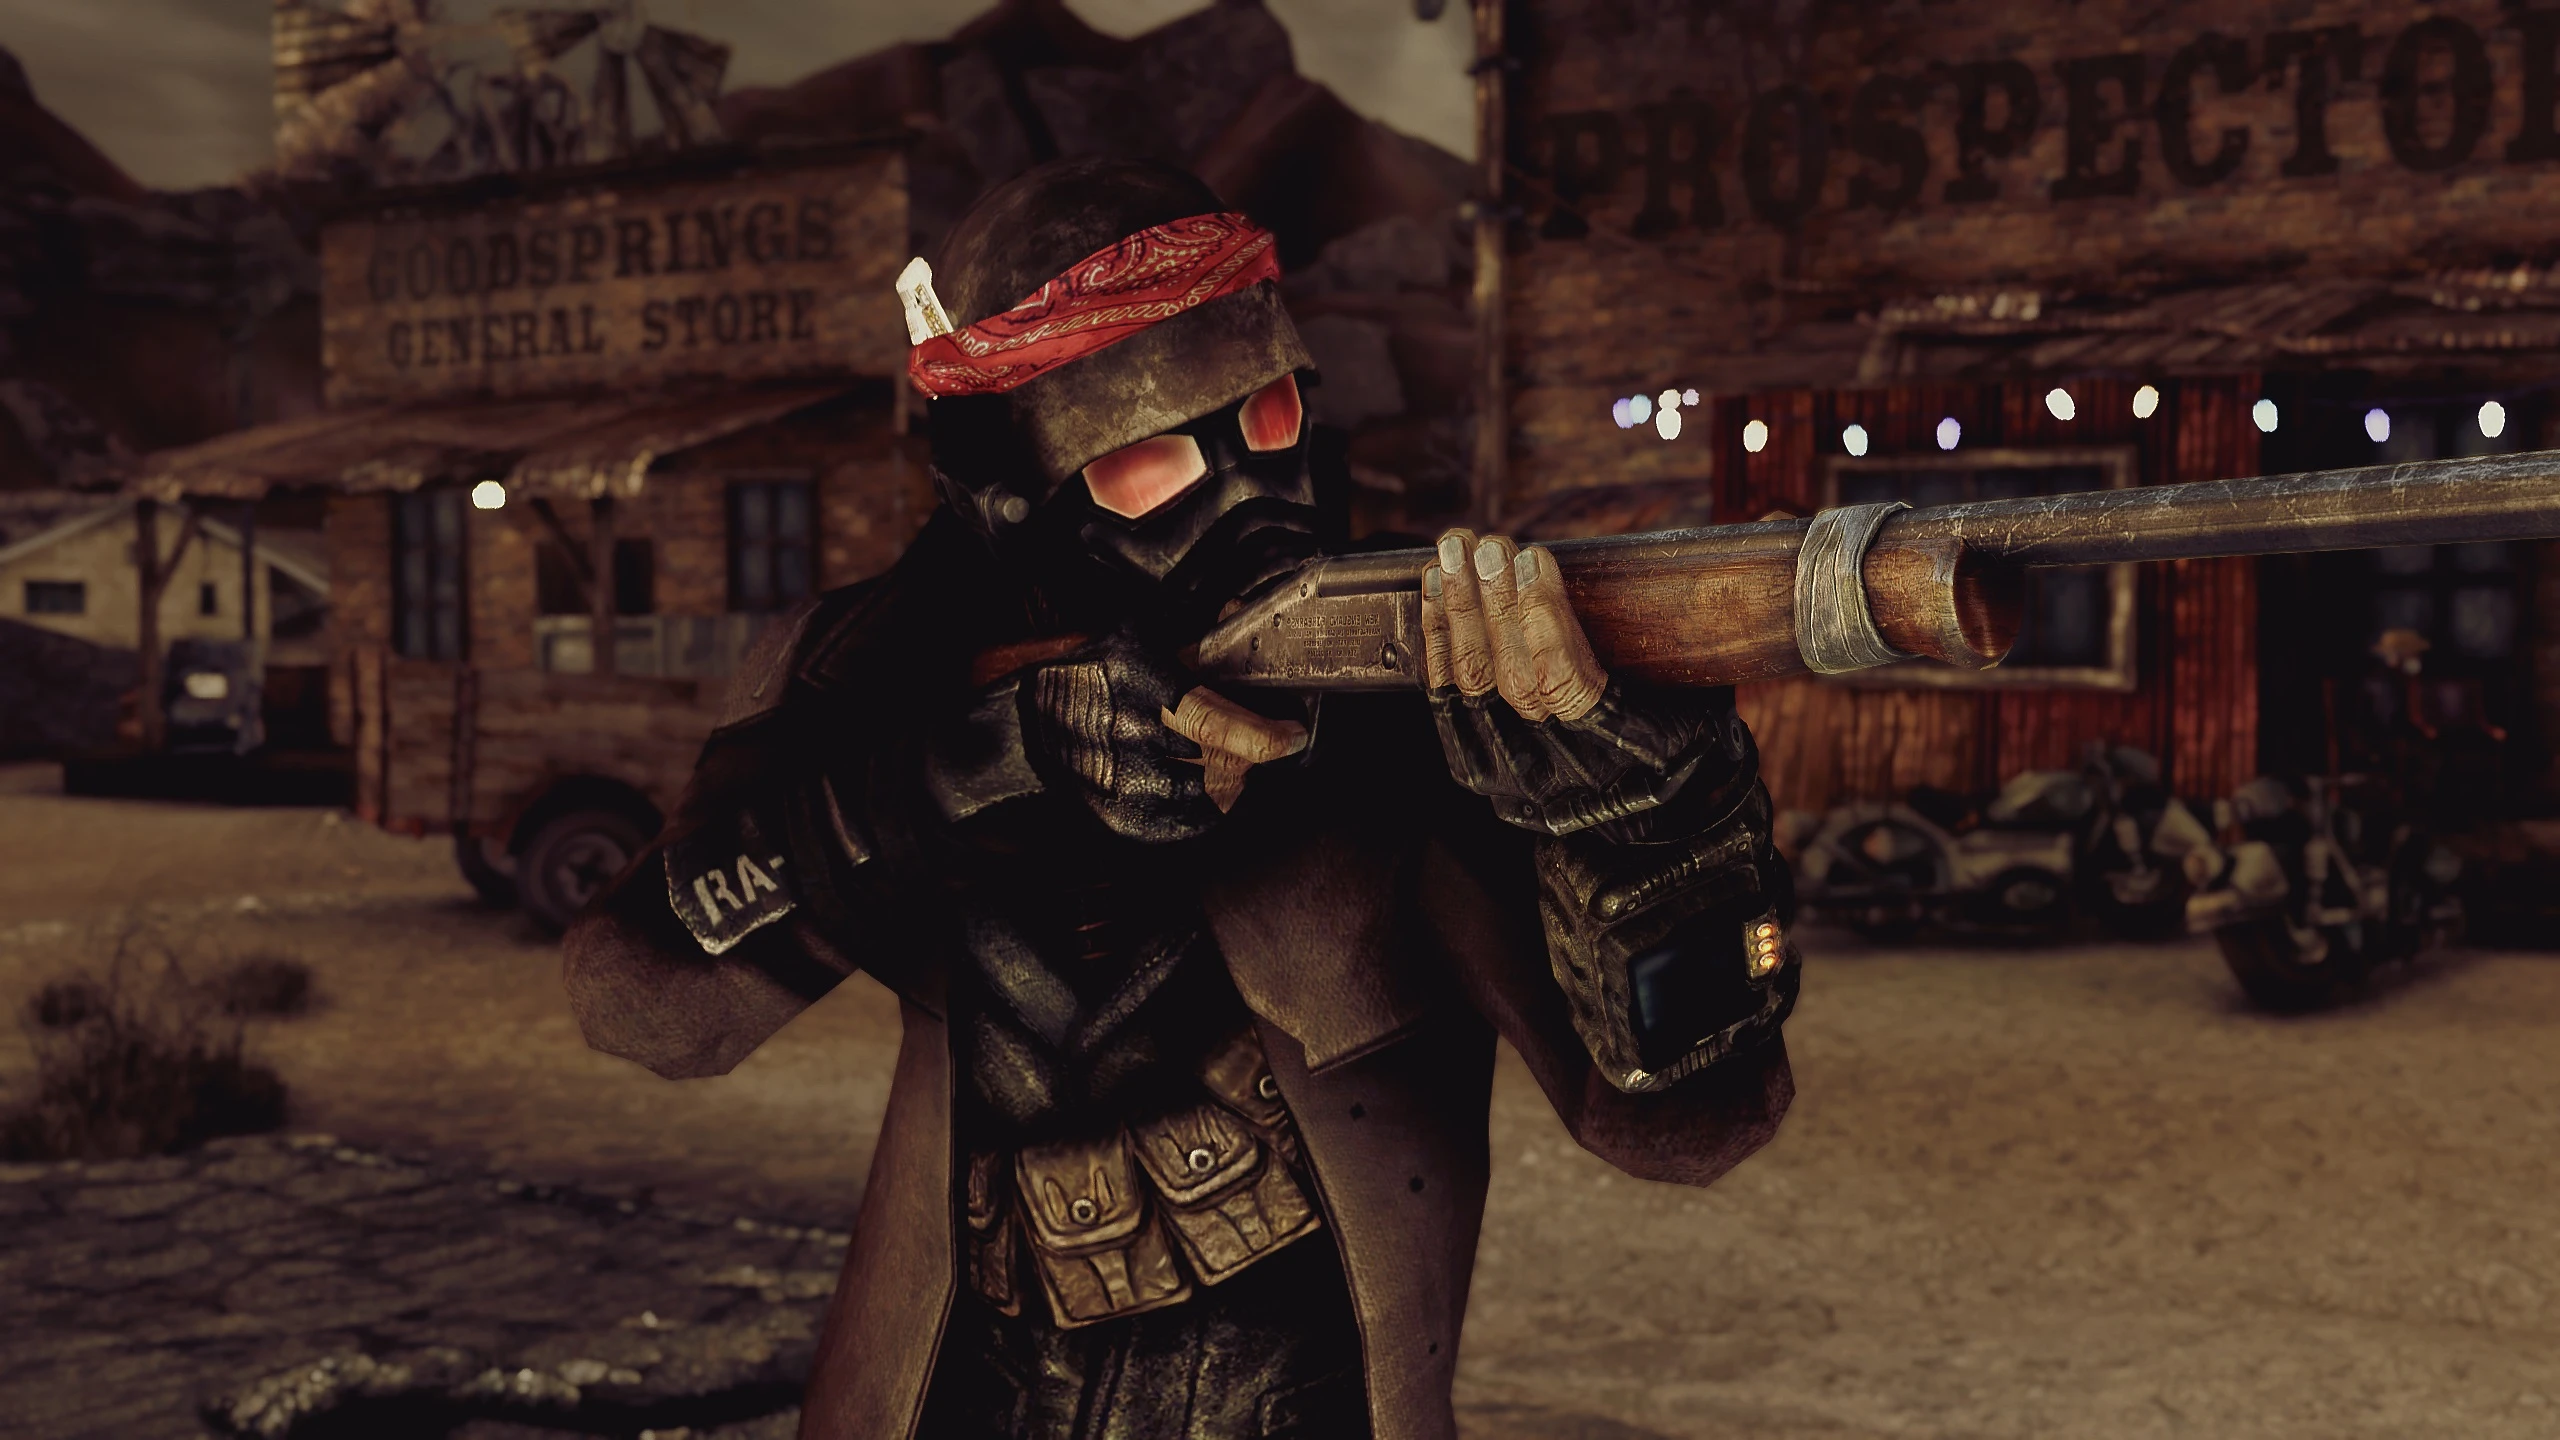 Rogue Ranger Armor Remastered At Fallout New Vegas Mods And Community